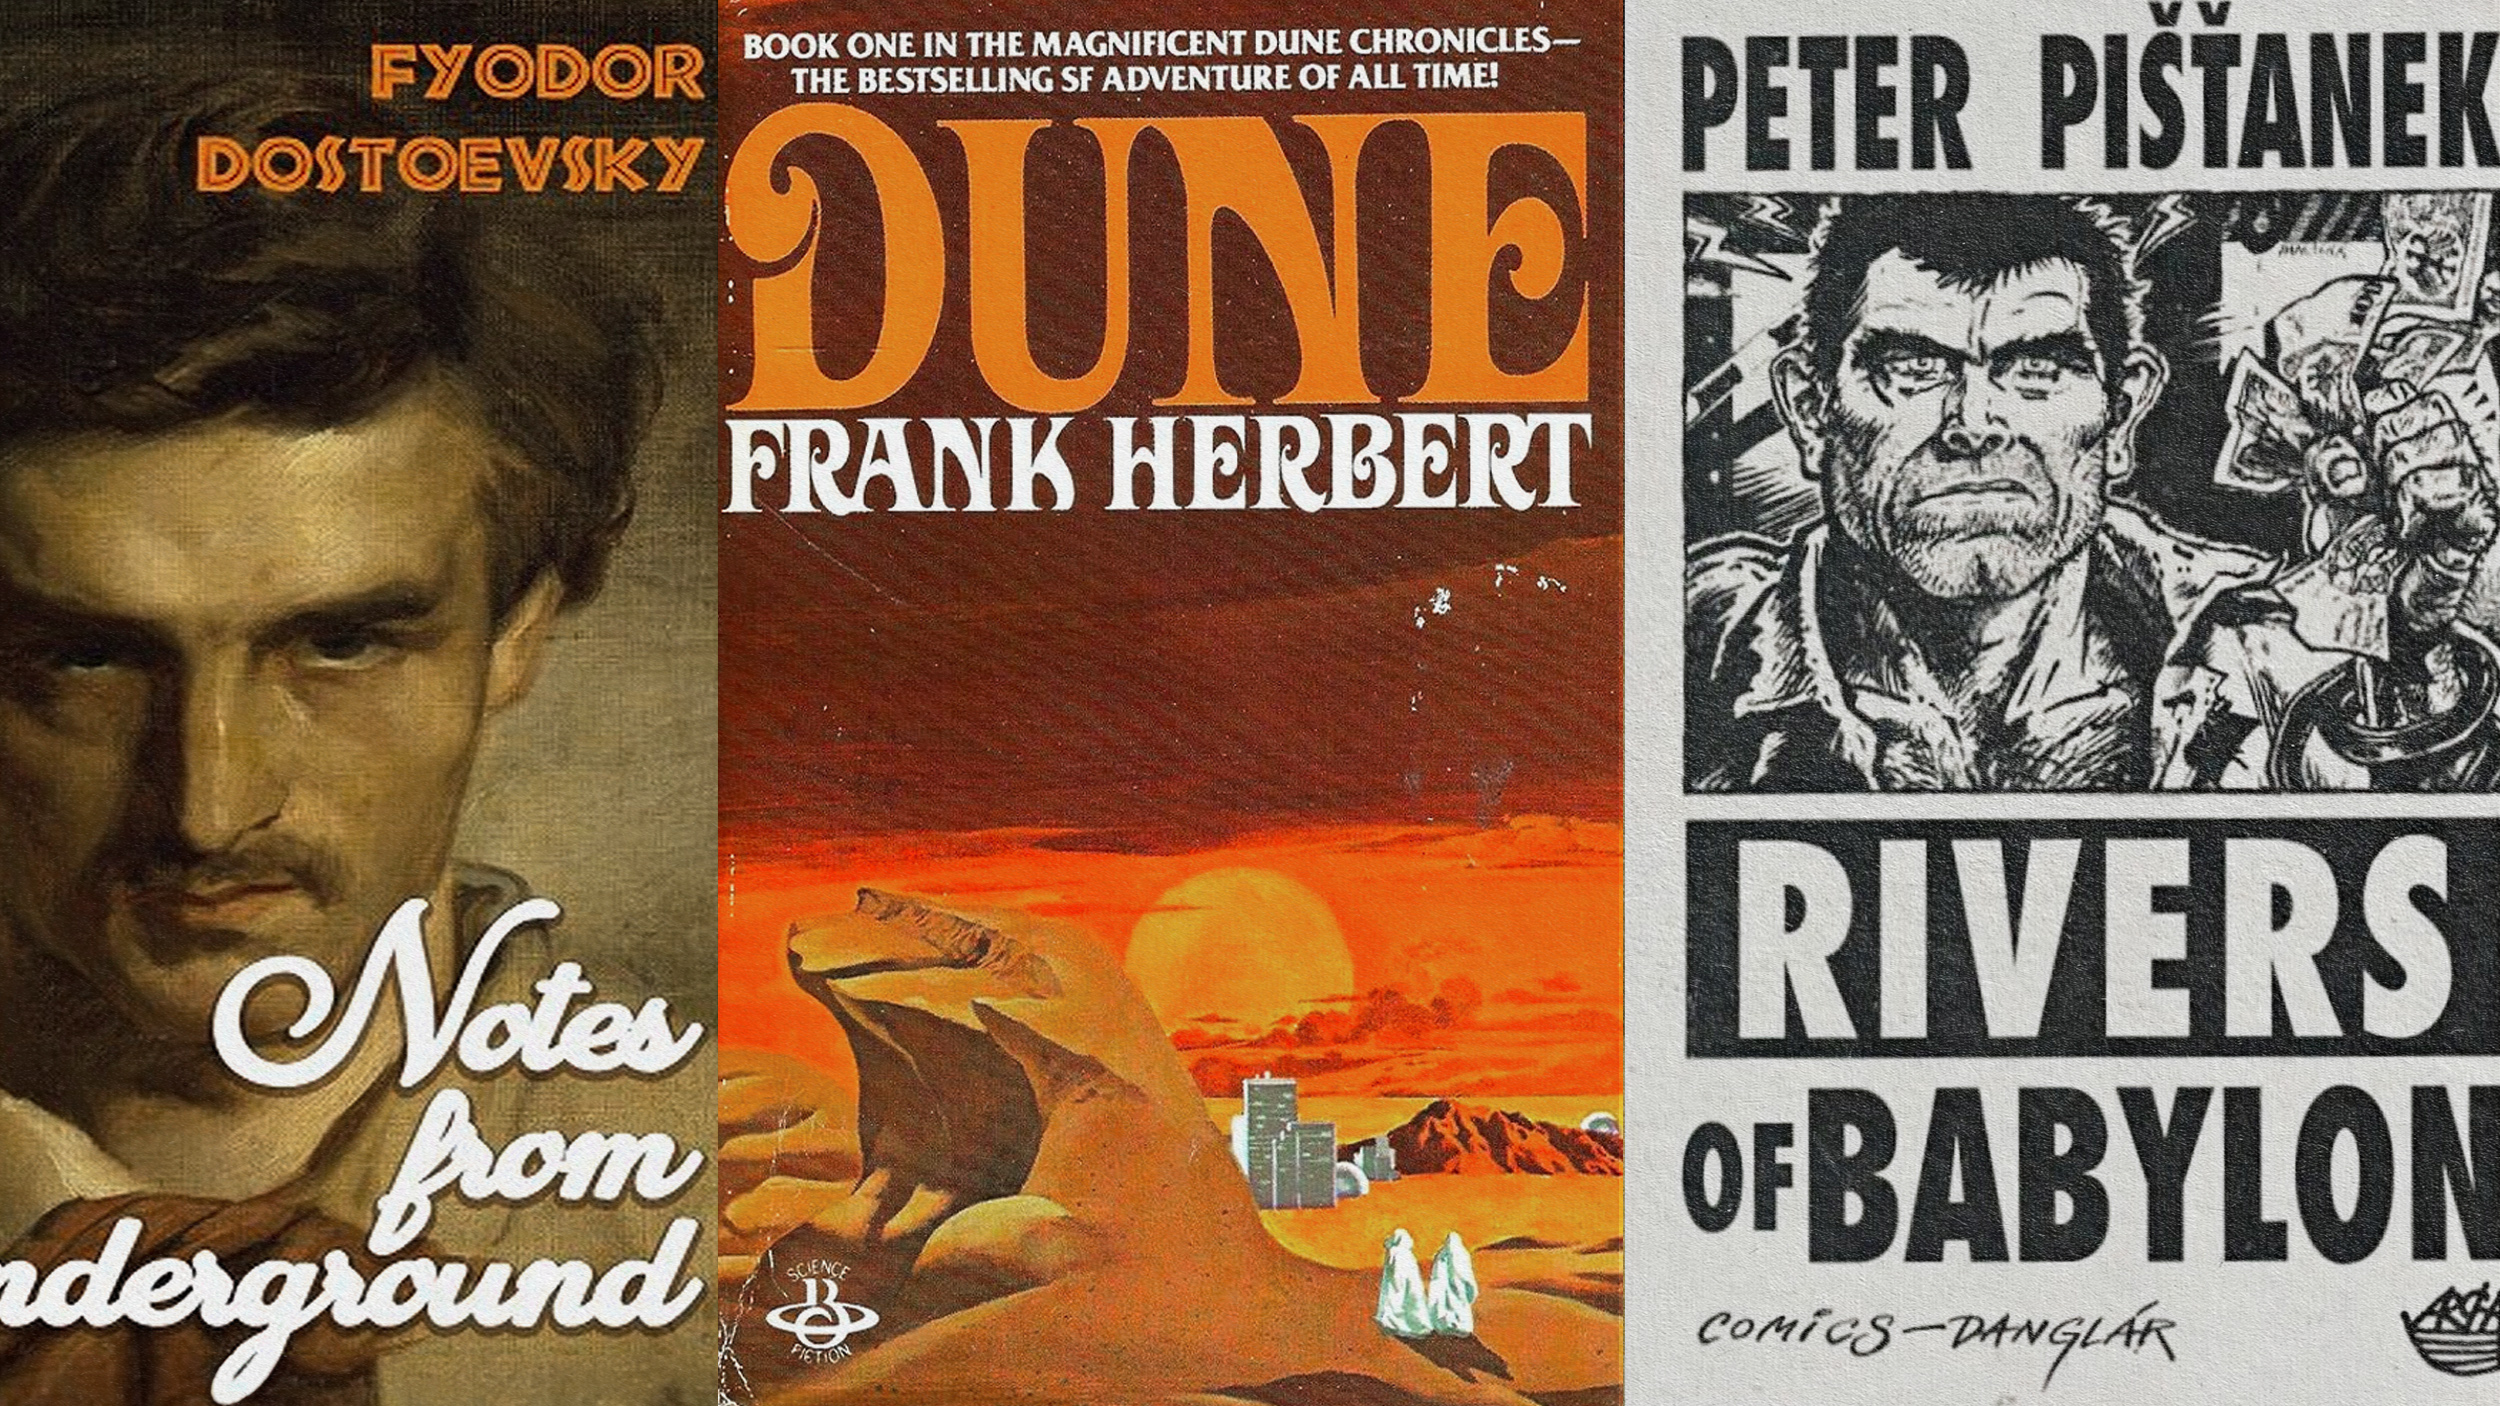 Dune features a determined protagonist in Frank Herbert's science fiction masterpiece.